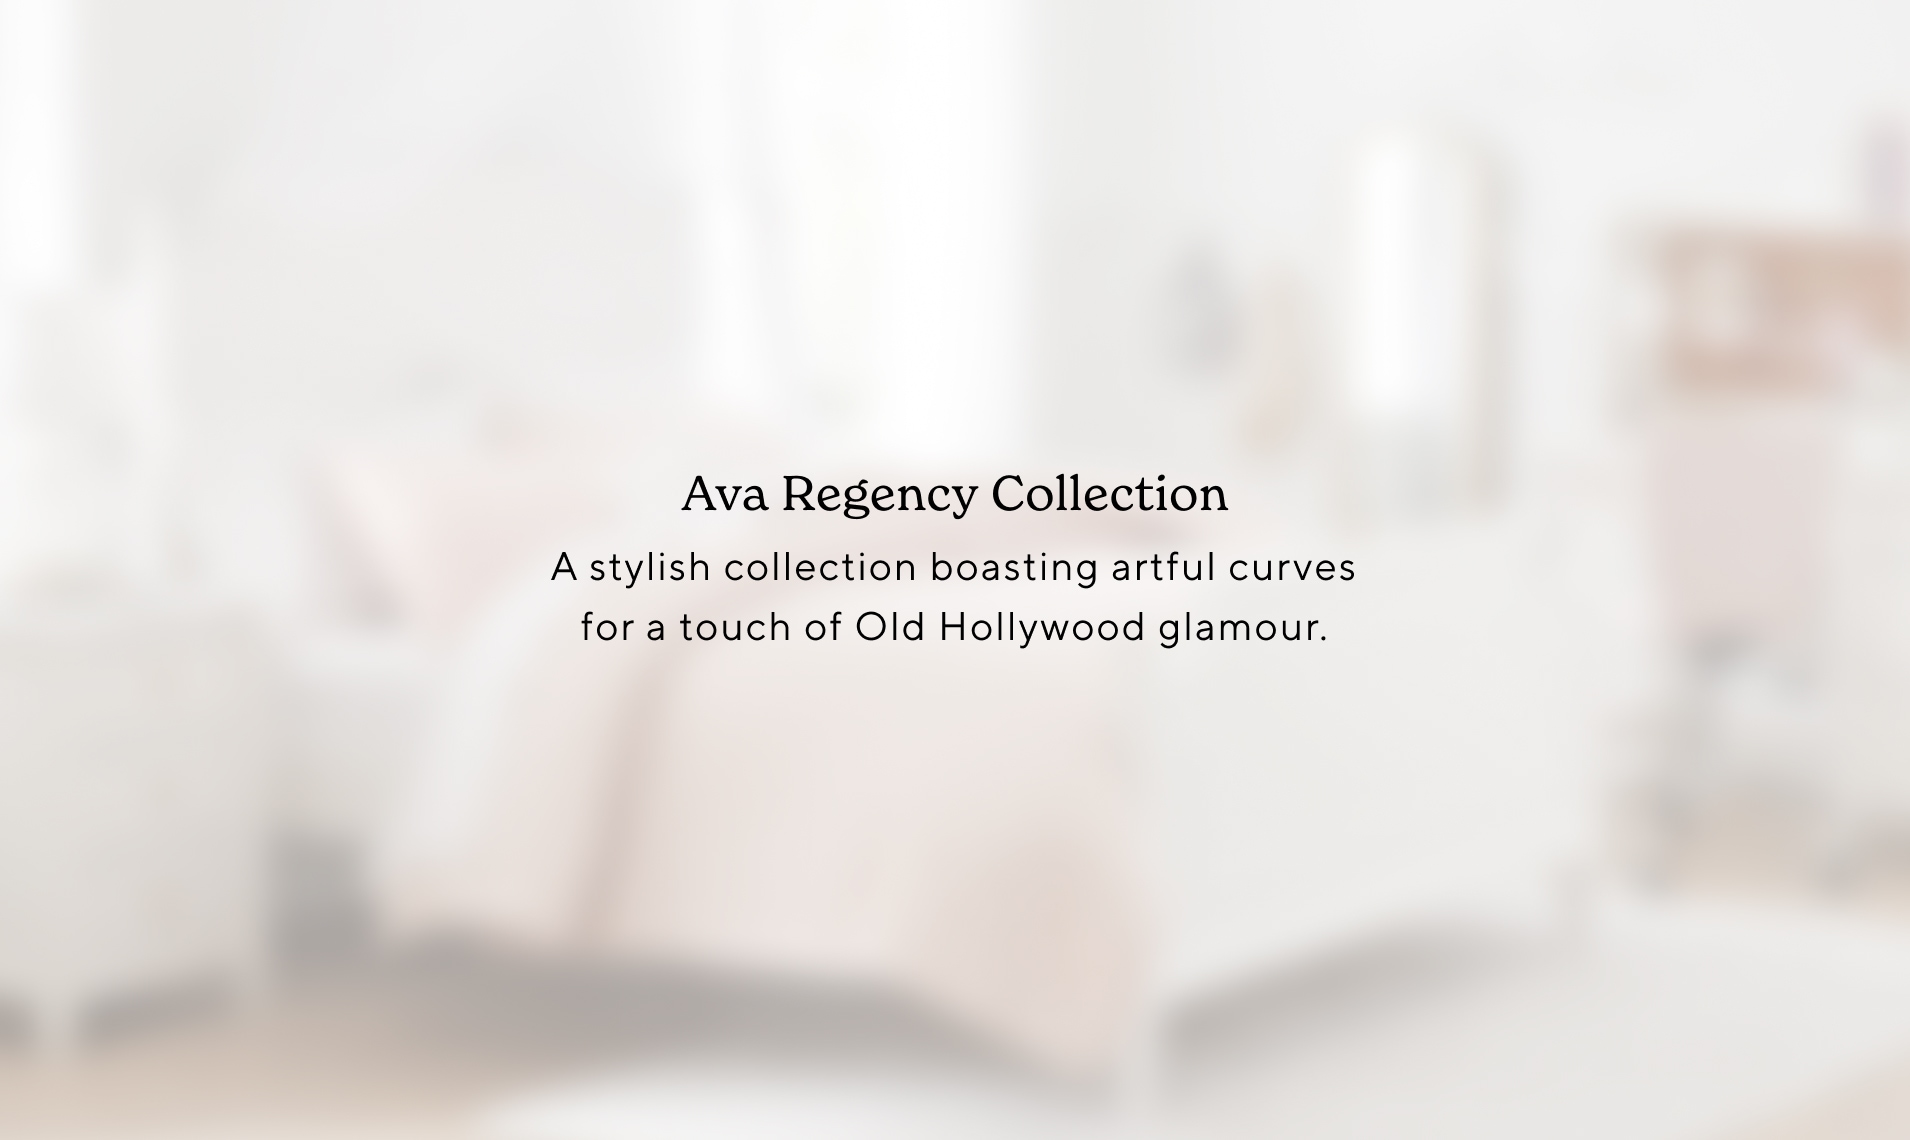 Ava Regency Collection